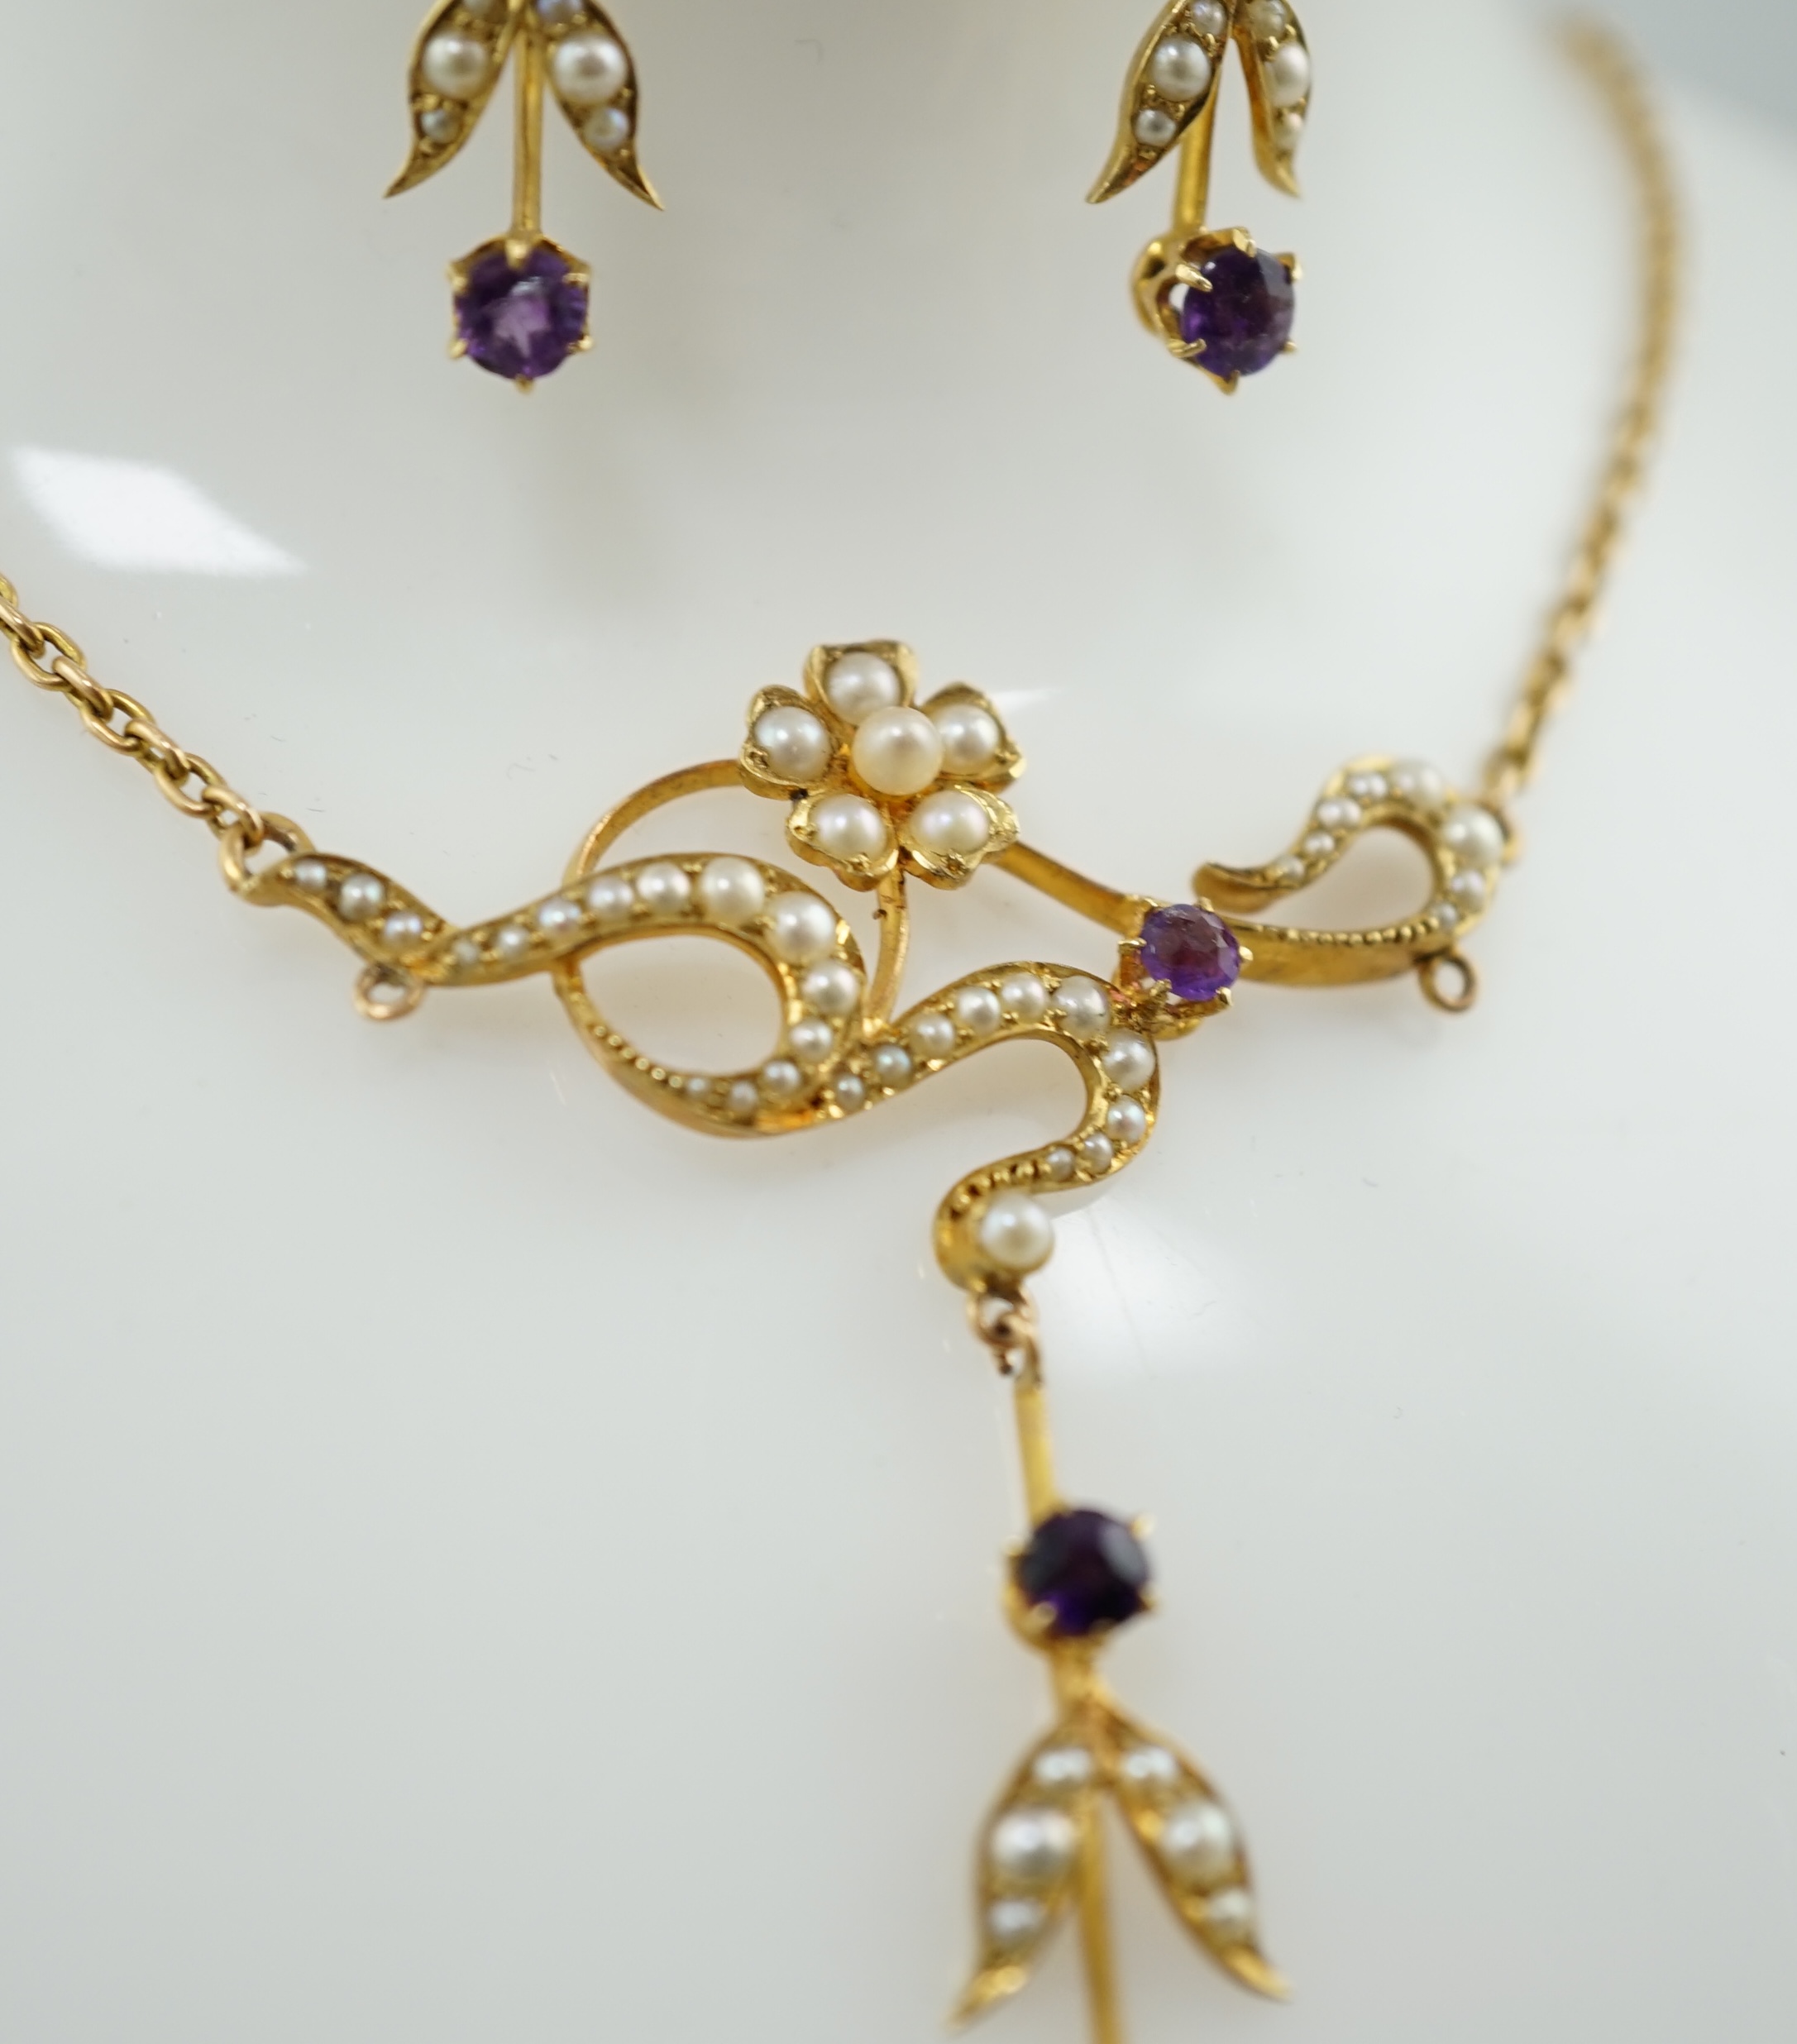 An Edwardian 15ct gold, seed pearl and amethyst set drop necklace and a pair of matching unmarked earrings